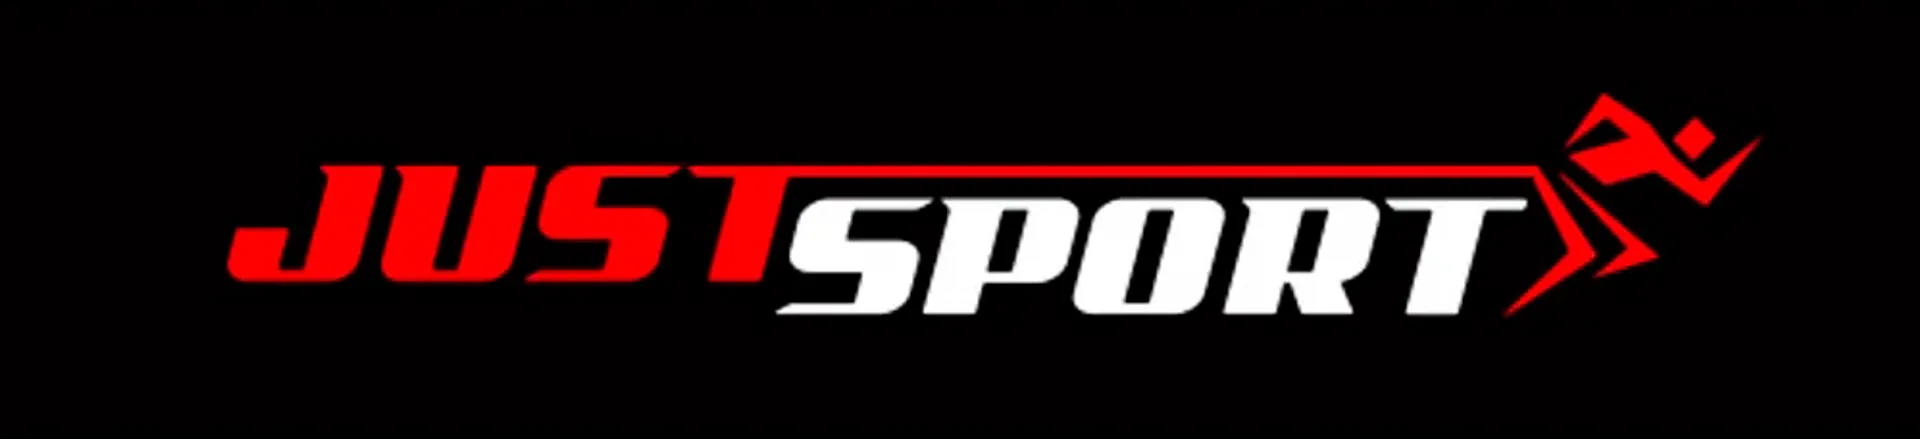 JUST SPORT logo of current catalogue